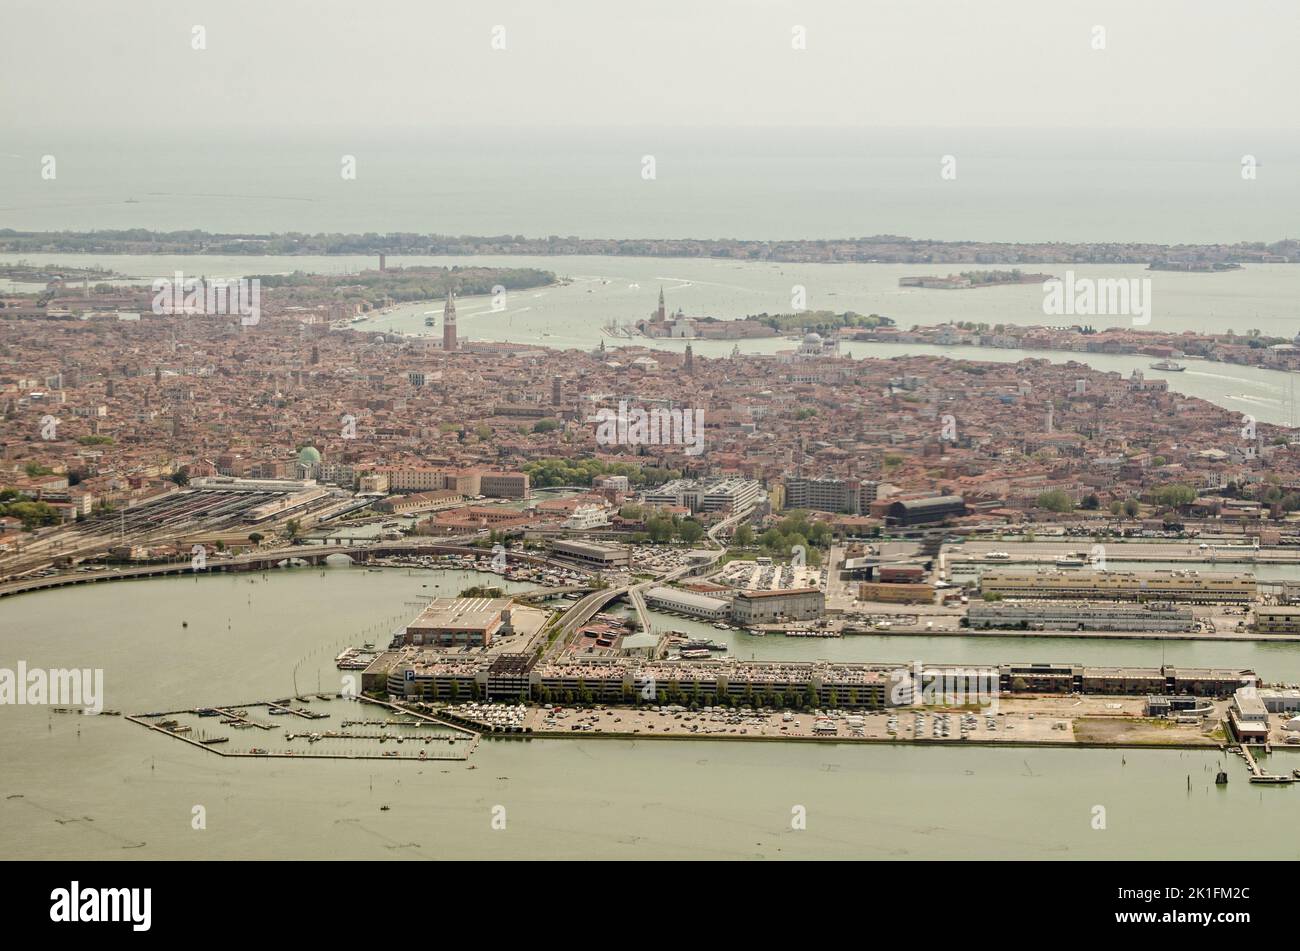 View from a plane looking across the Port of Venice with the Tronchetto island at the bottom and Lido towards the top. Stock Photo